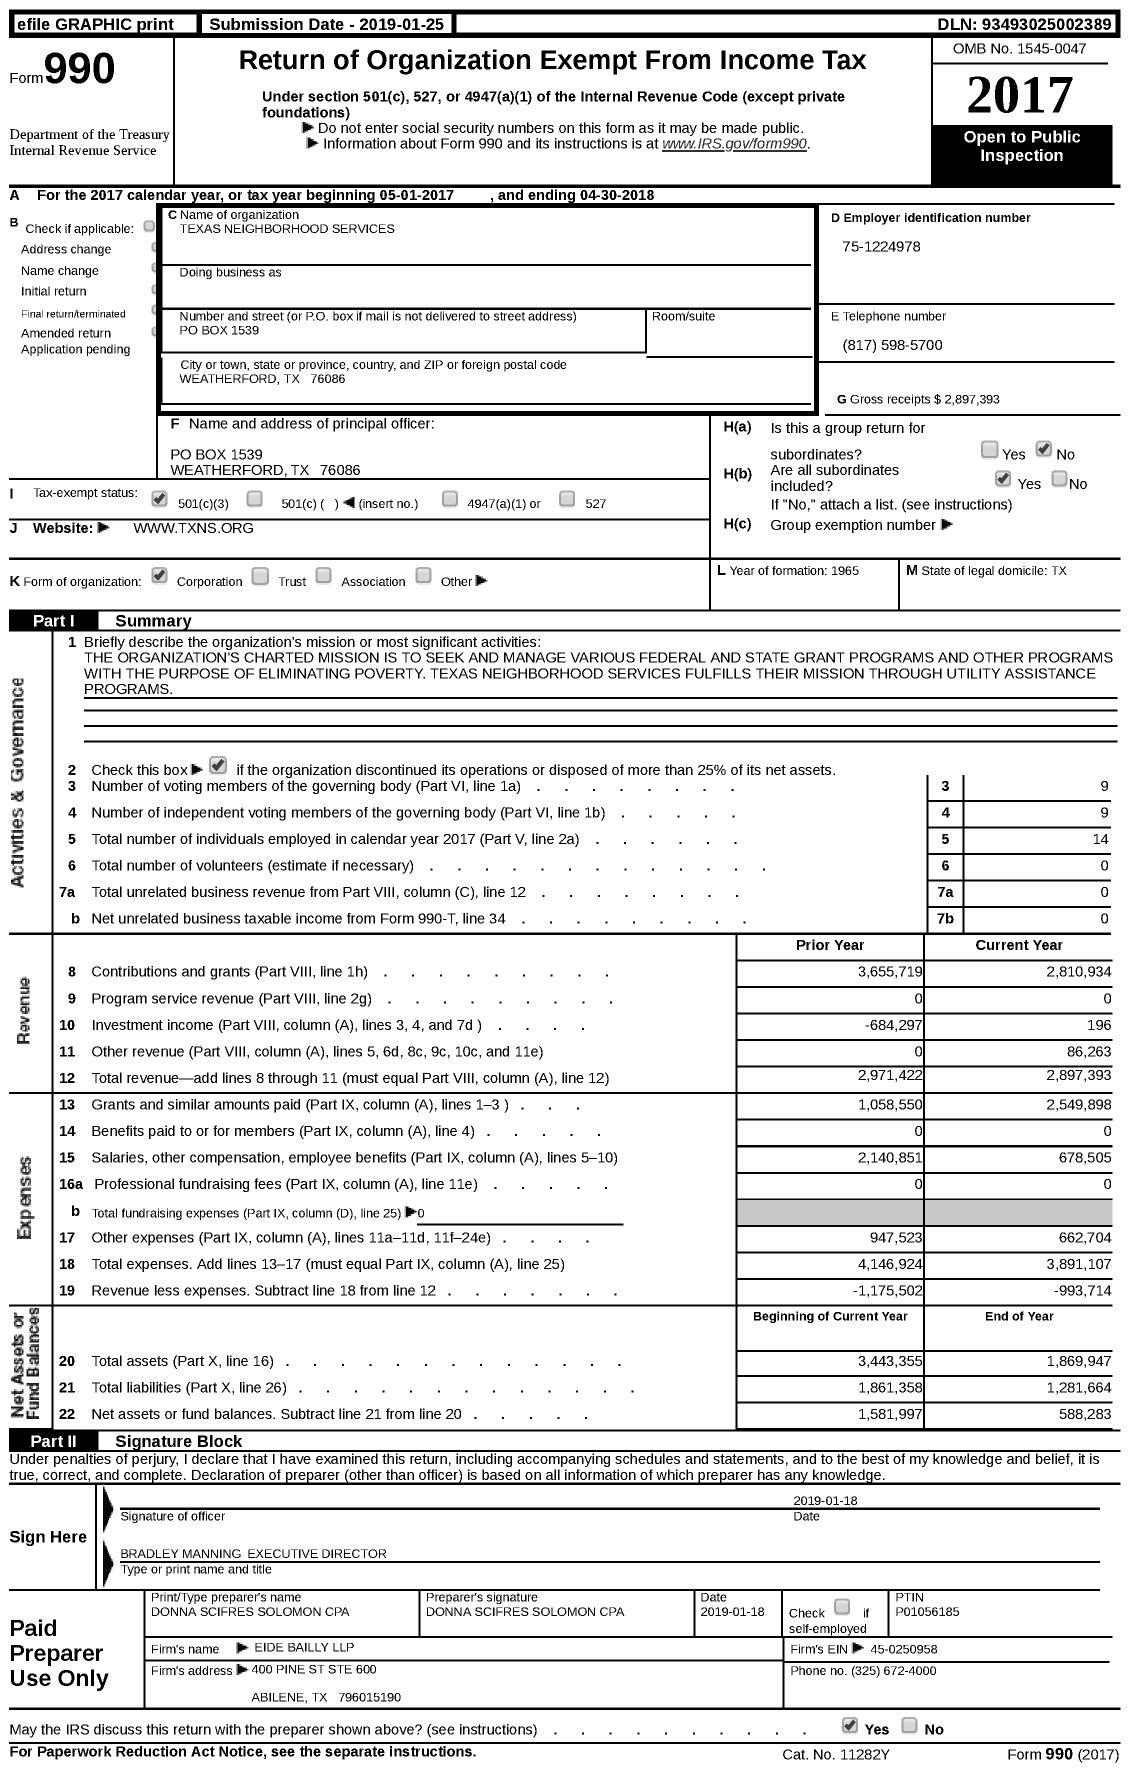 Image of first page of 2017 Form 990 for Texas Neighborhood Services (TNS)